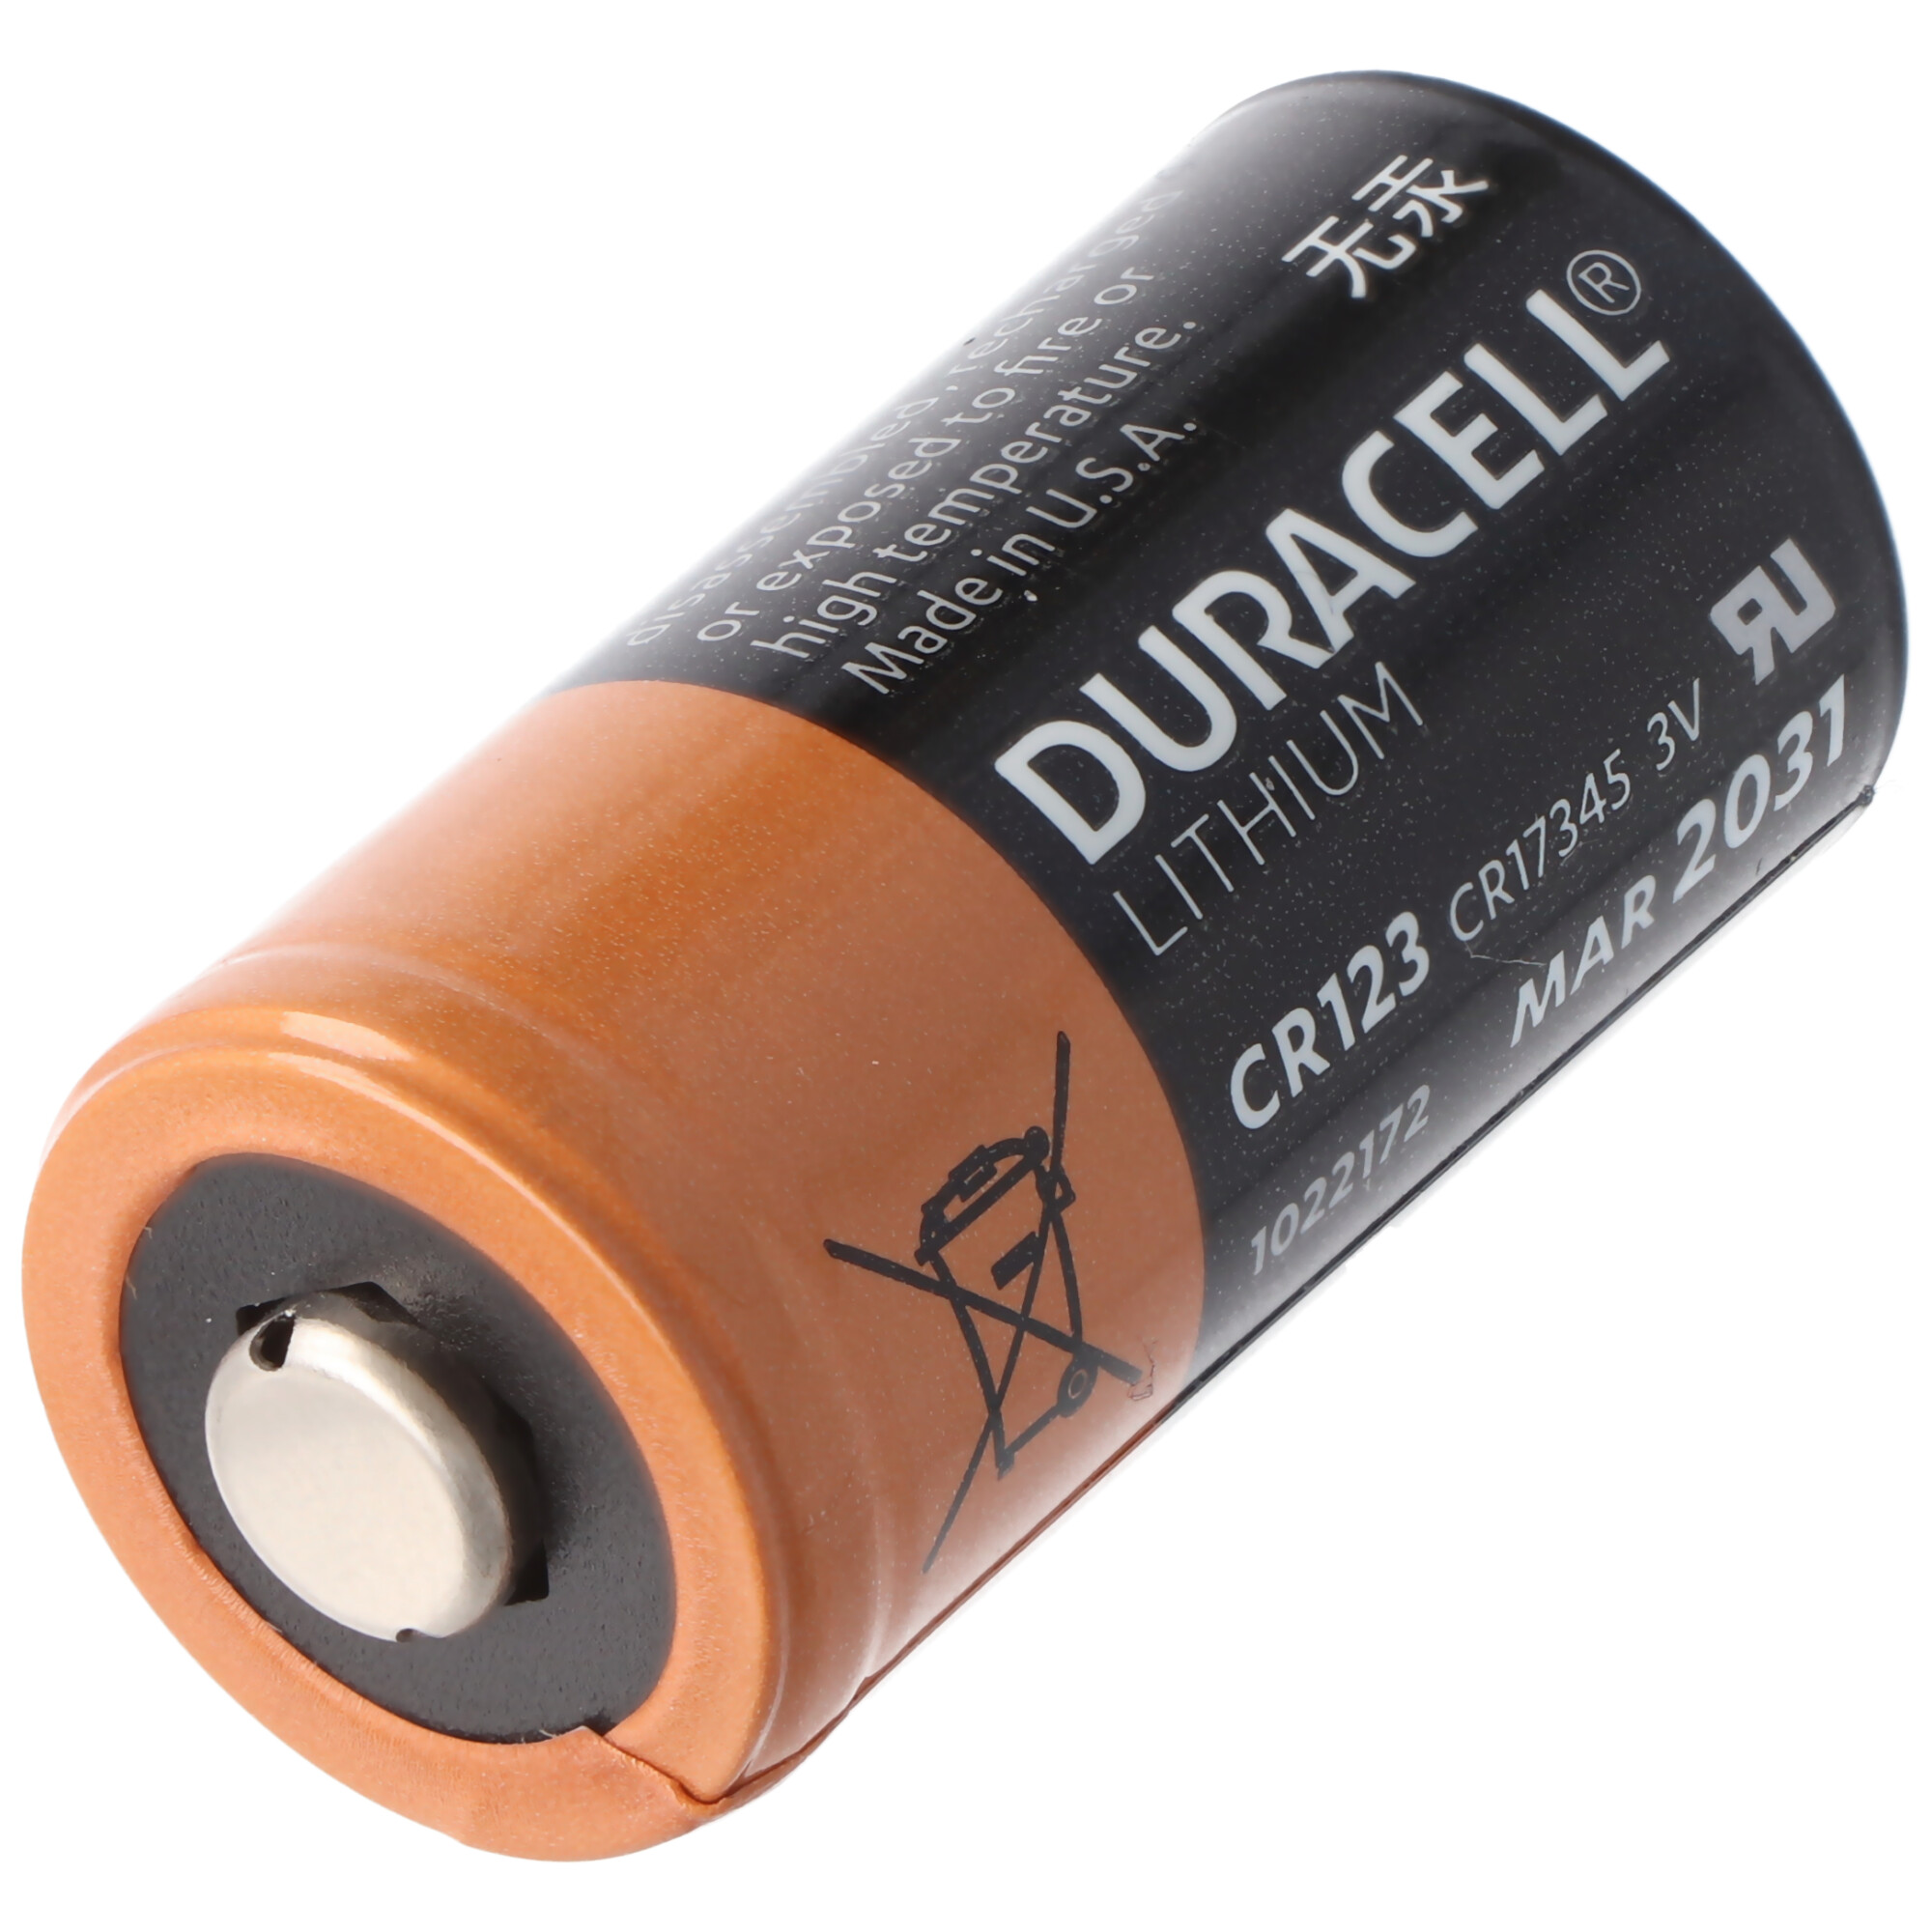 Duracell Batterie Lithium, CR123A, 3V Photo, Ultra, Lose Ware Bulk 1-Pack